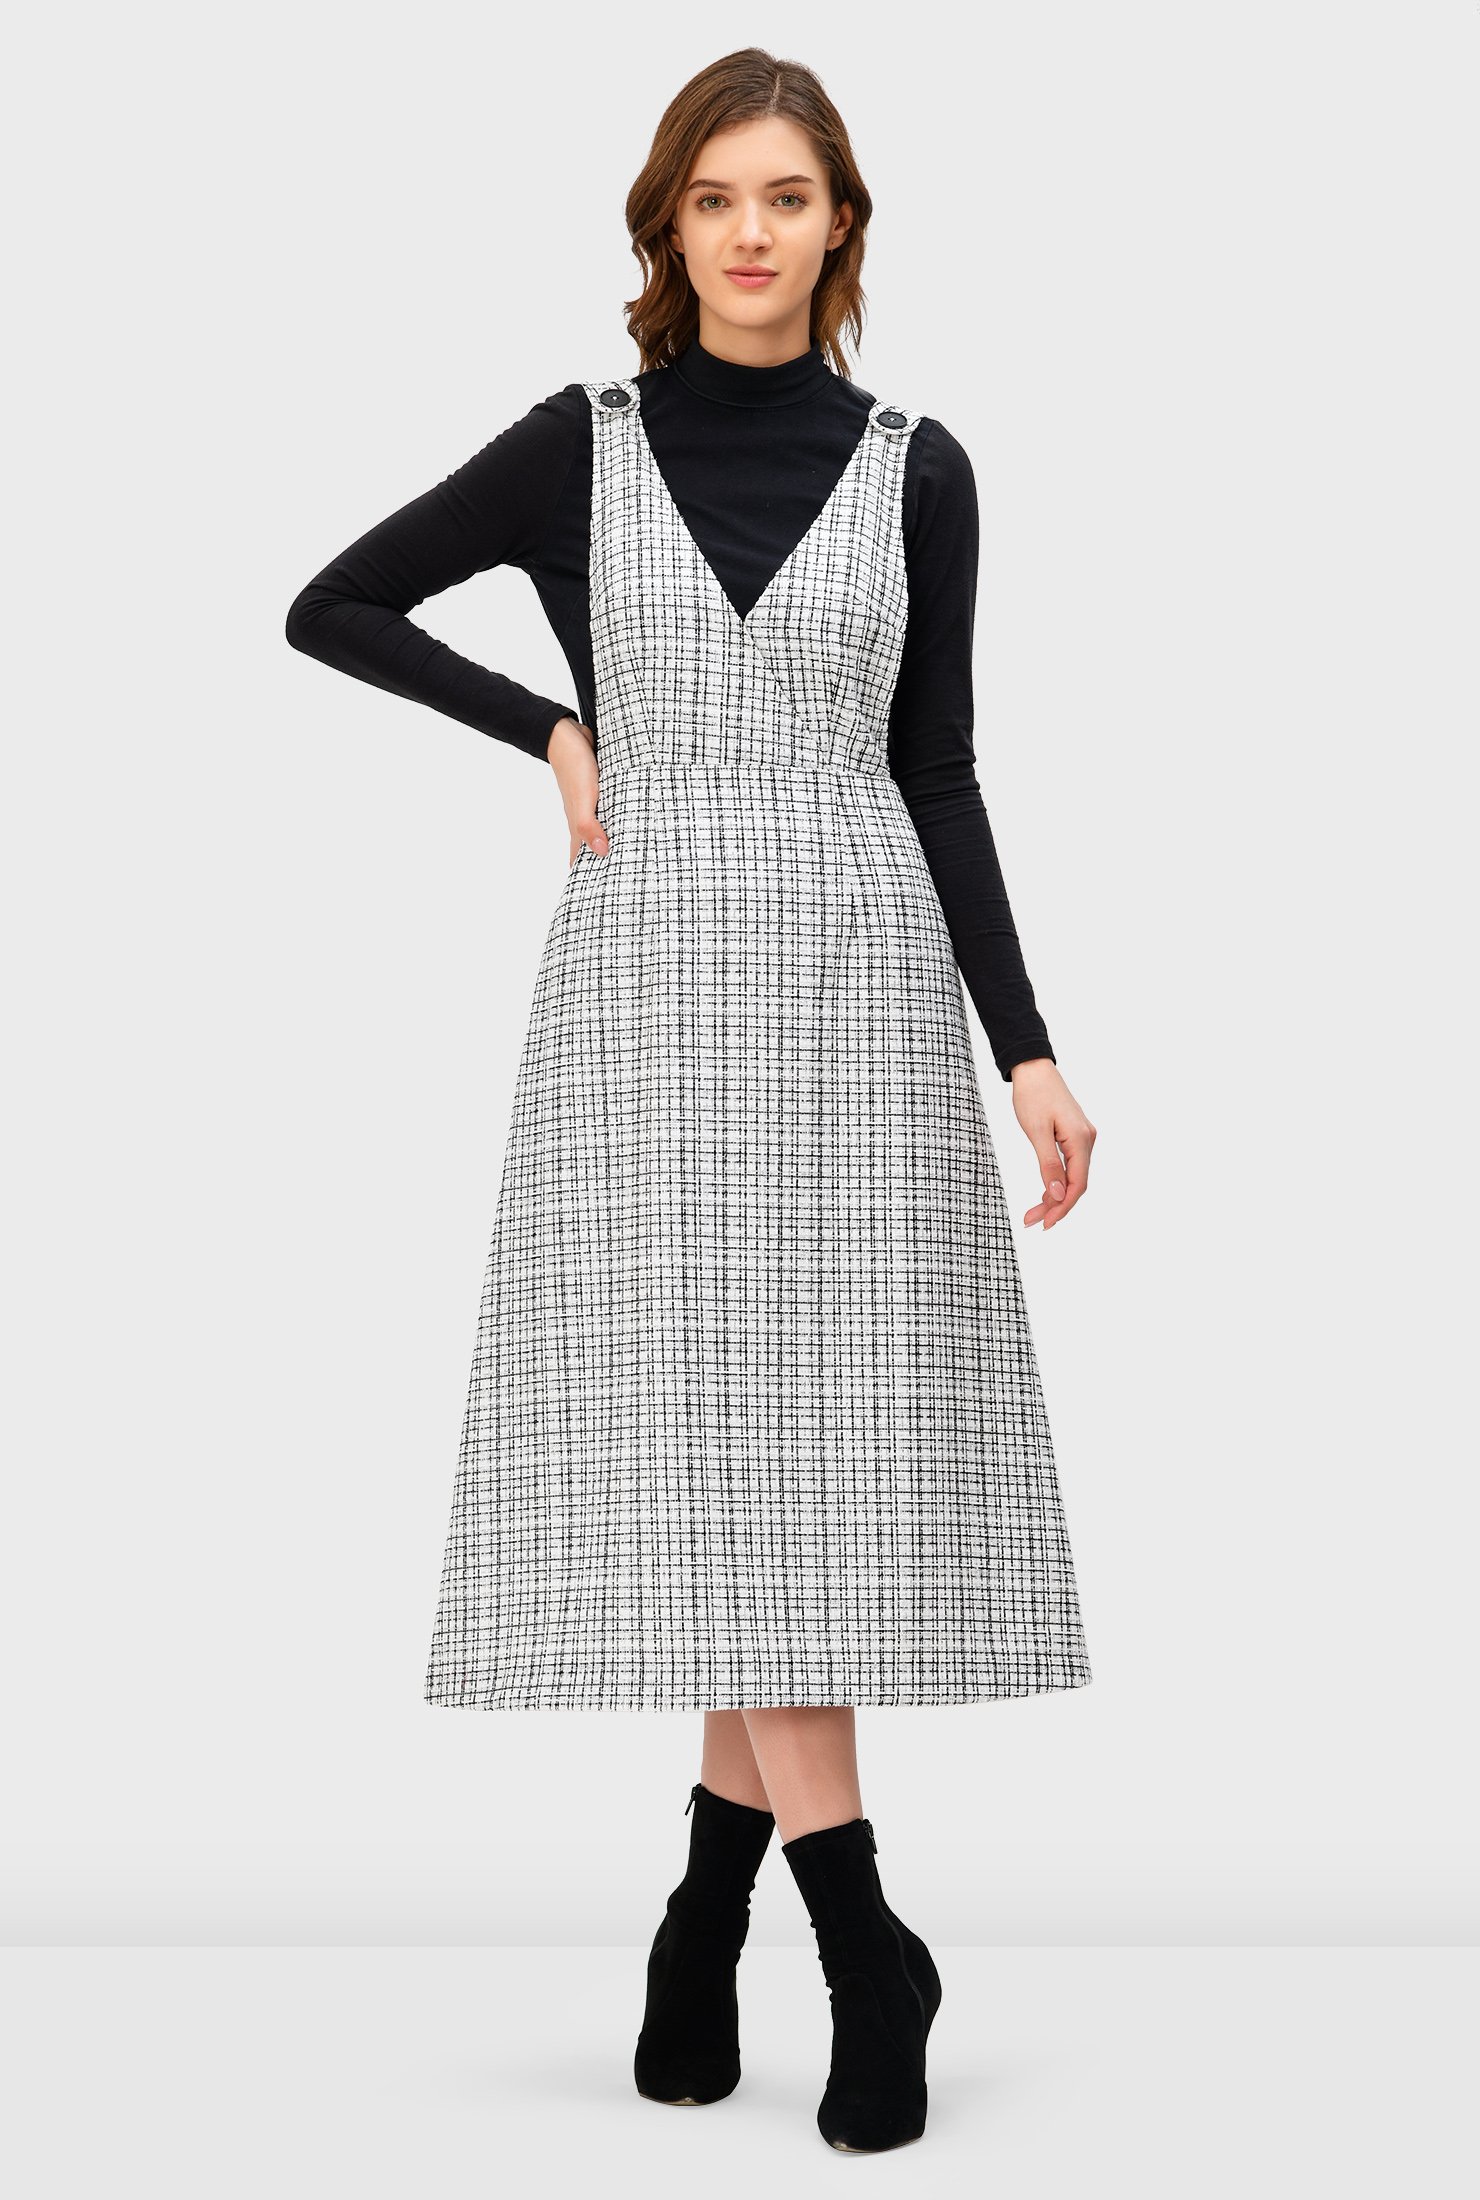 Zara Pinafore Overall Skirt black-white weave pattern casual look Fashion Skirts Pinafore Overall Skirts 